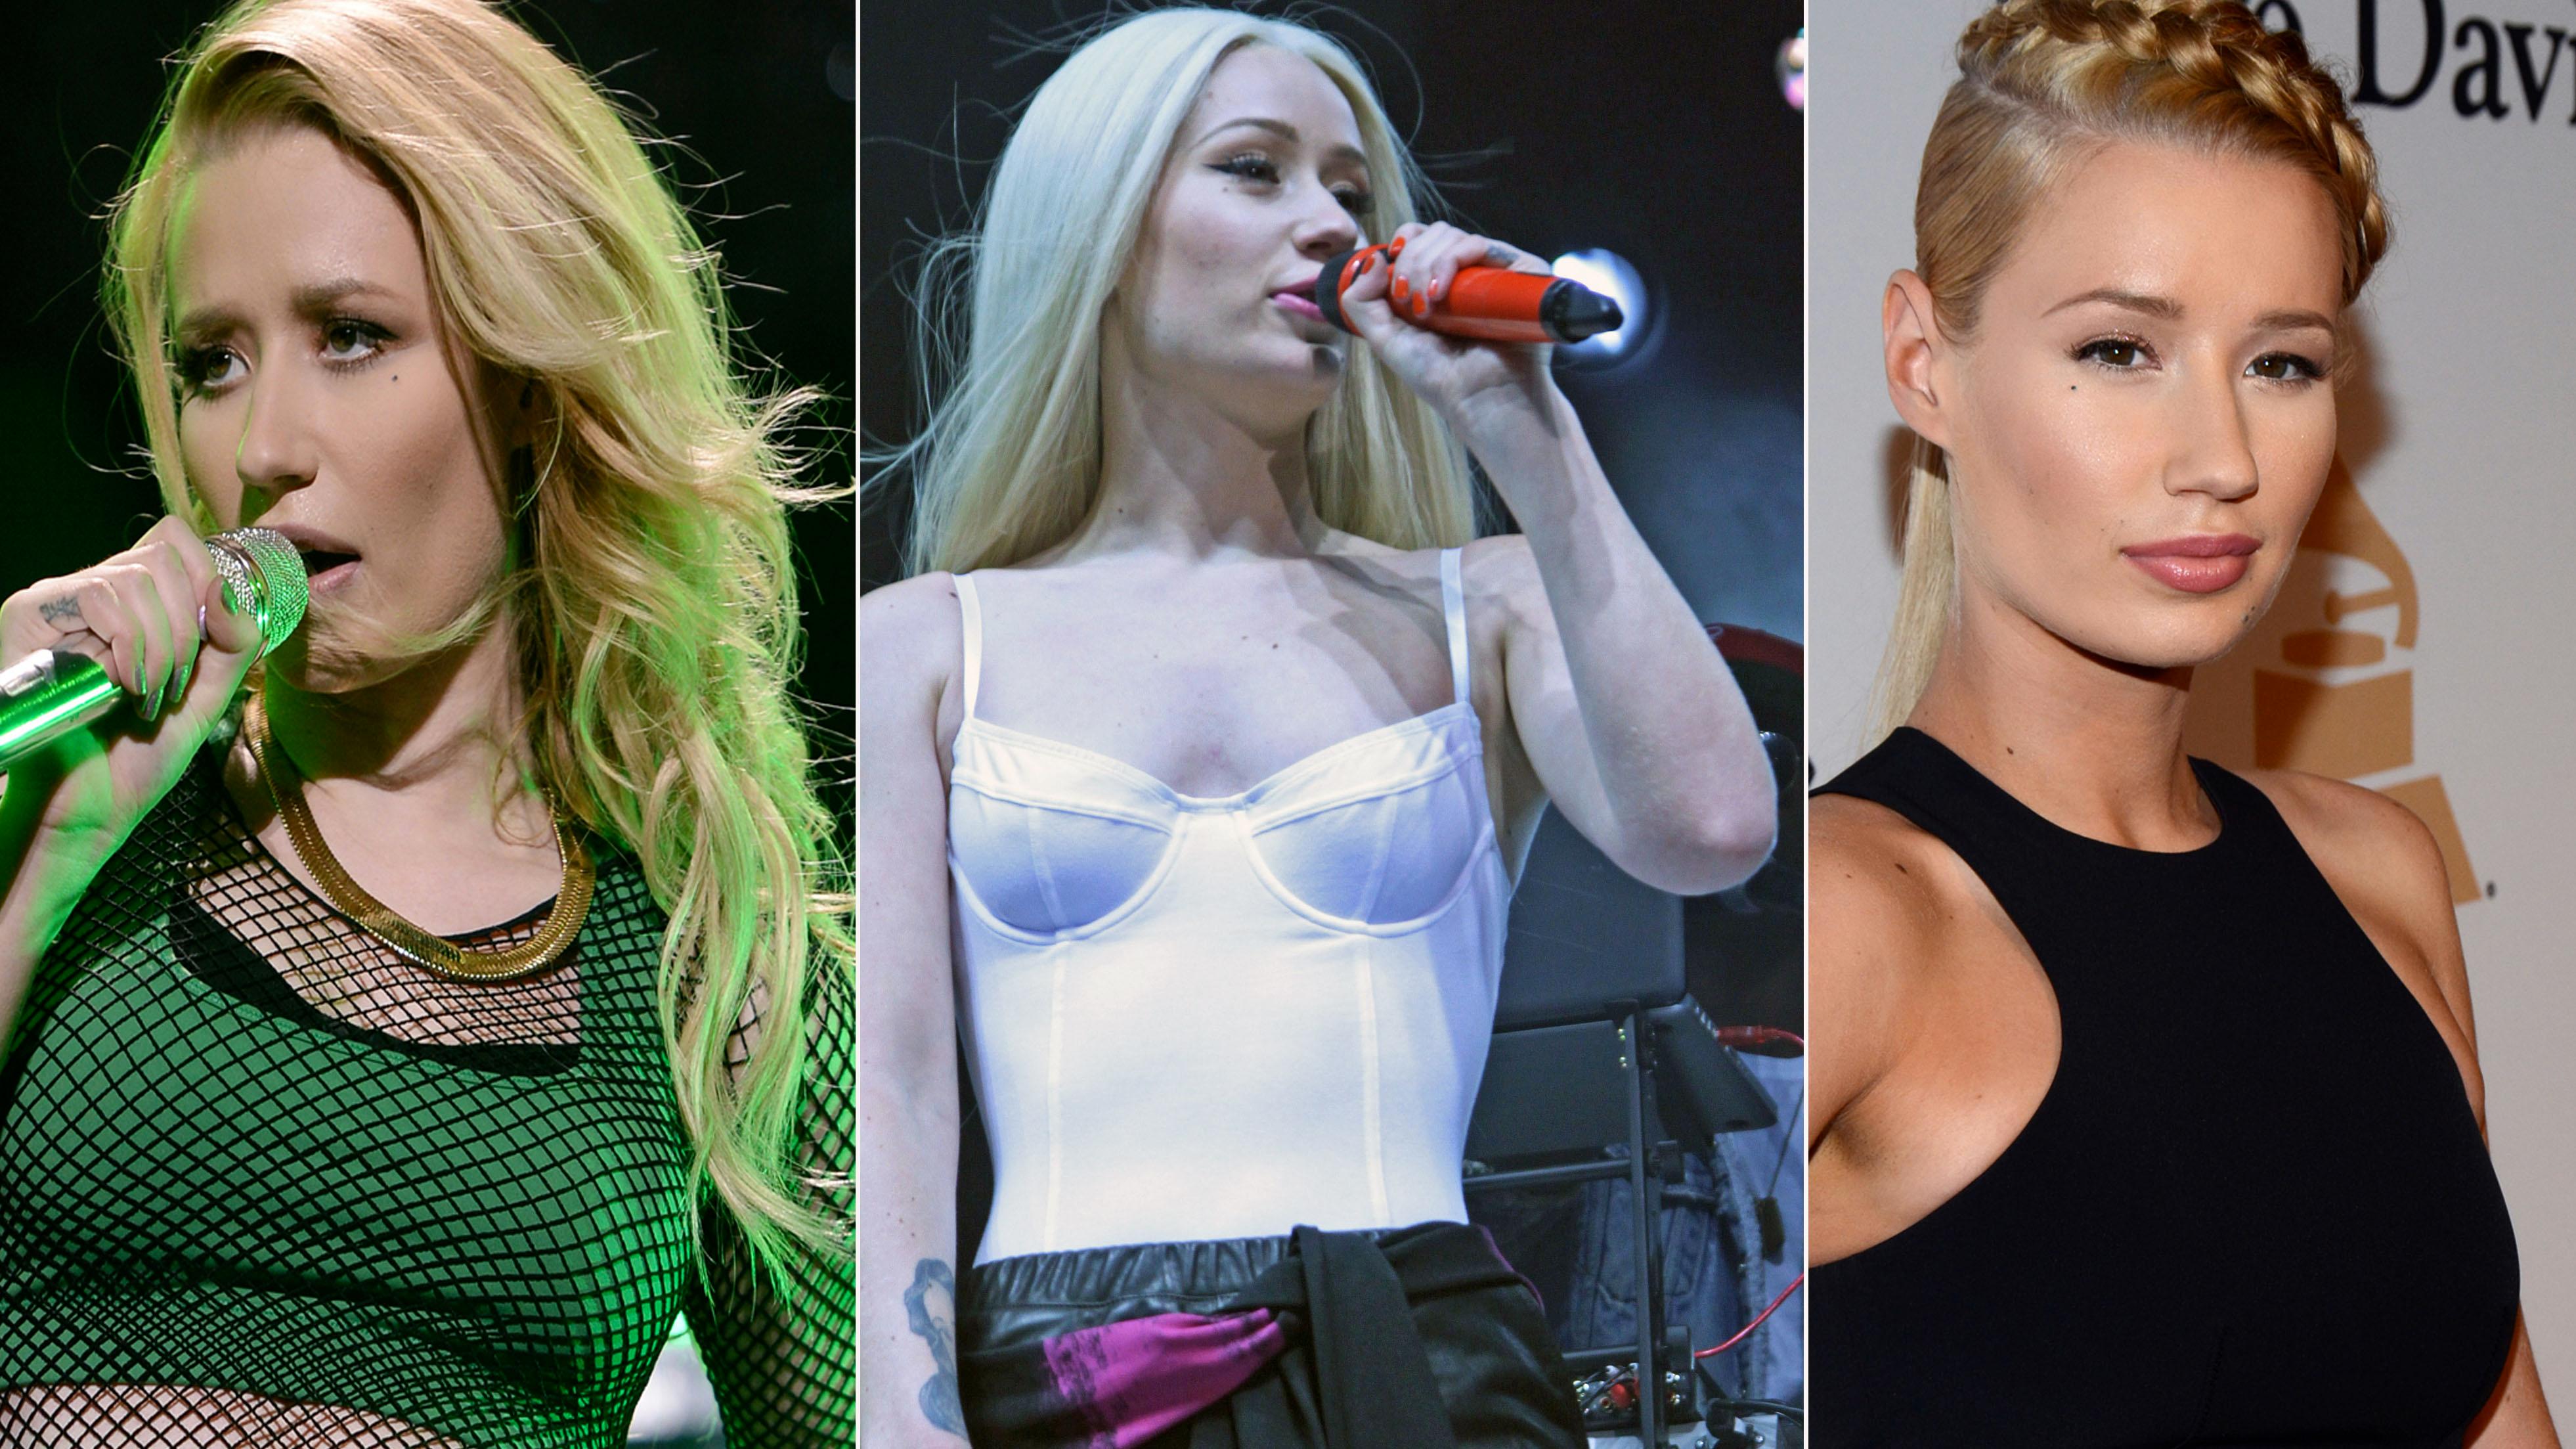 Iggy Azalea performs at the Radio 1Xtra concert at the Liverpool Echo Arena